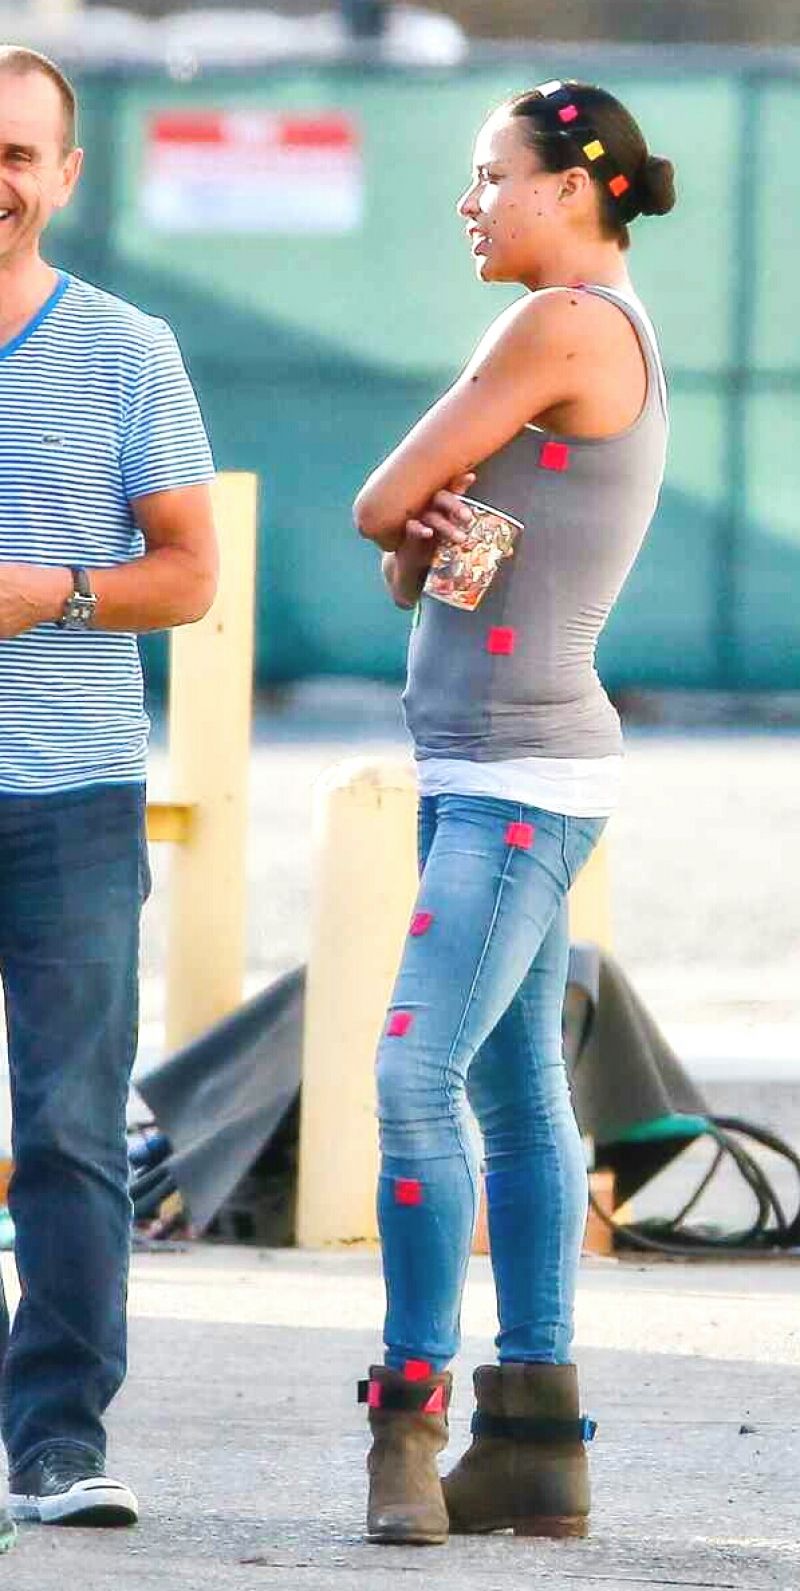 Michelle Rodriguez On The Set Of Fast 7 The Fast And The Furious July 2014 Celebmafia